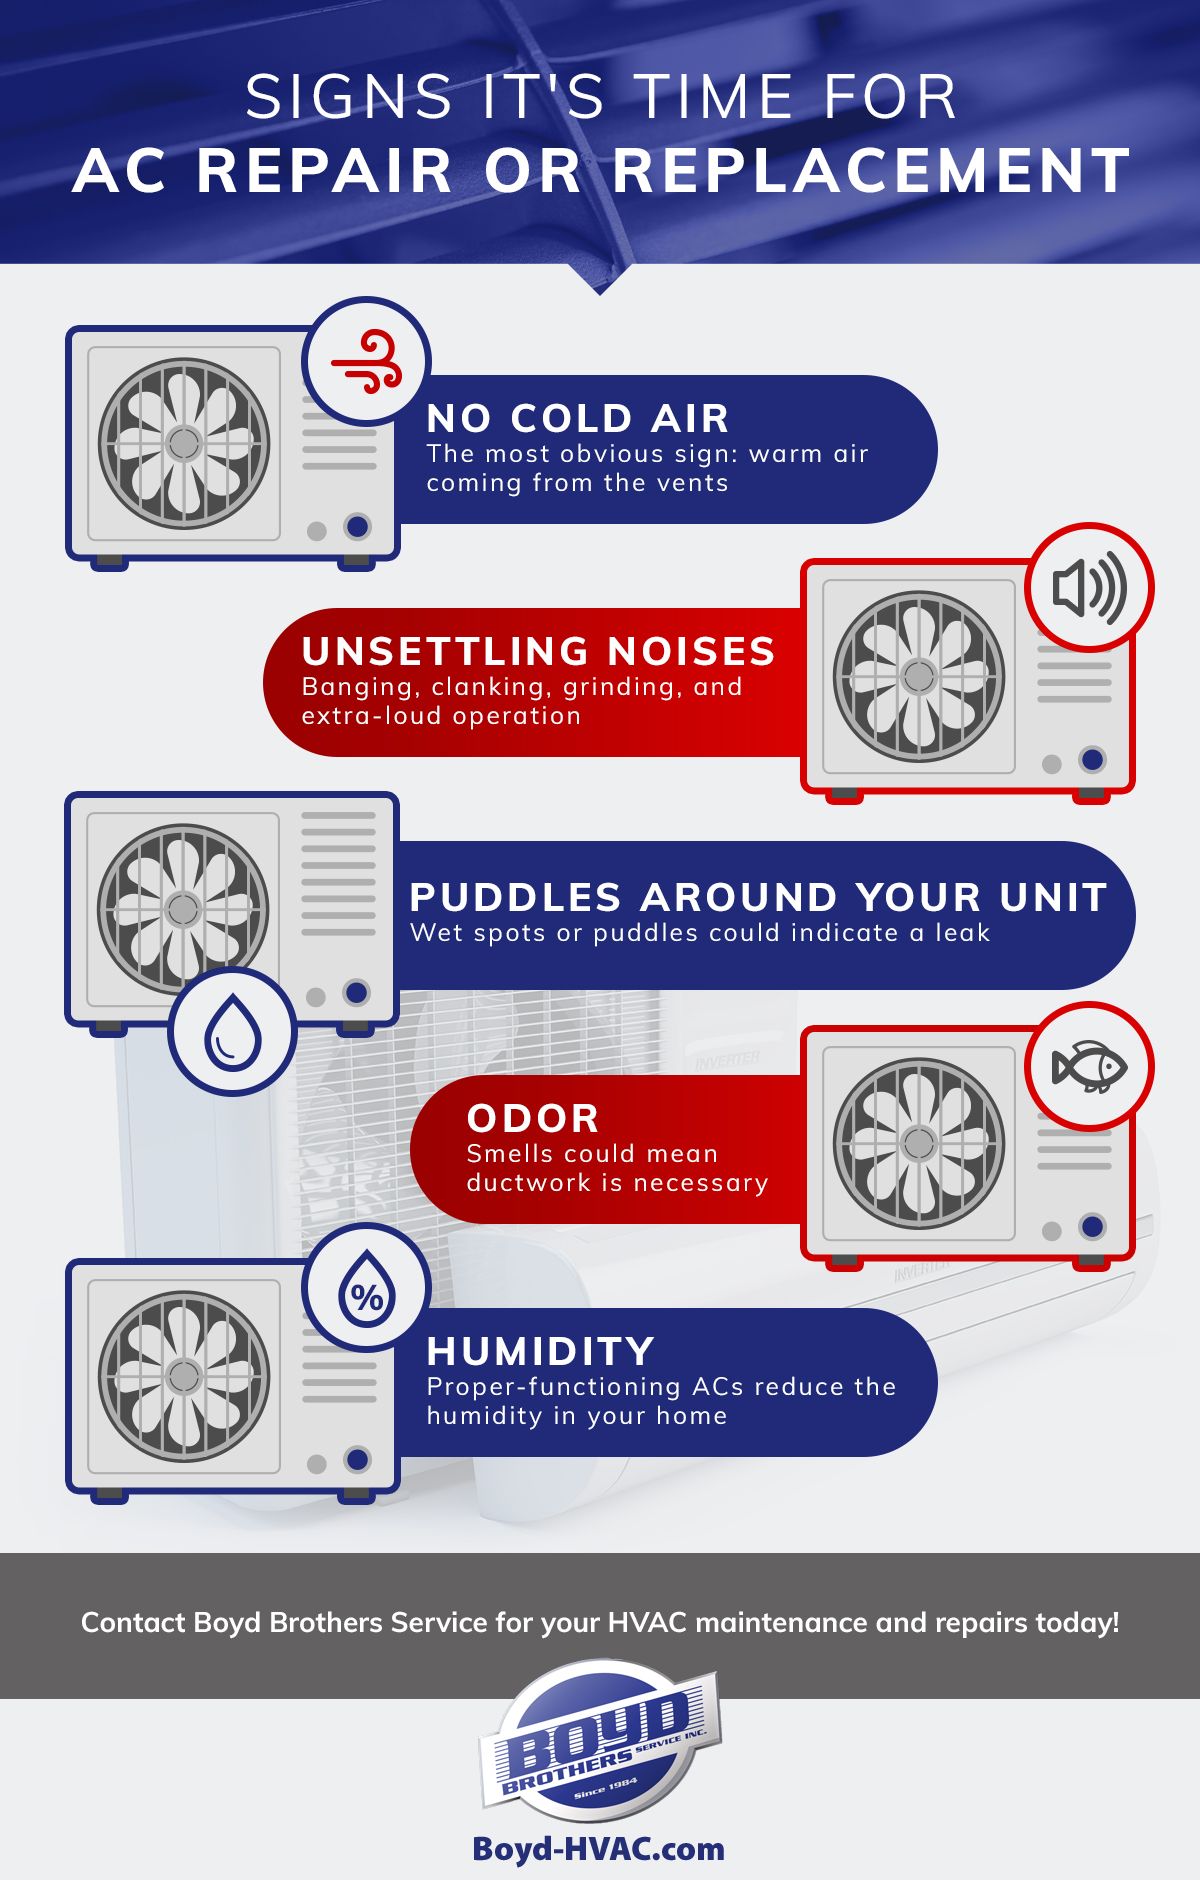 Signs-to-Replace-Infographic-5f77814dbb5f2.jpg